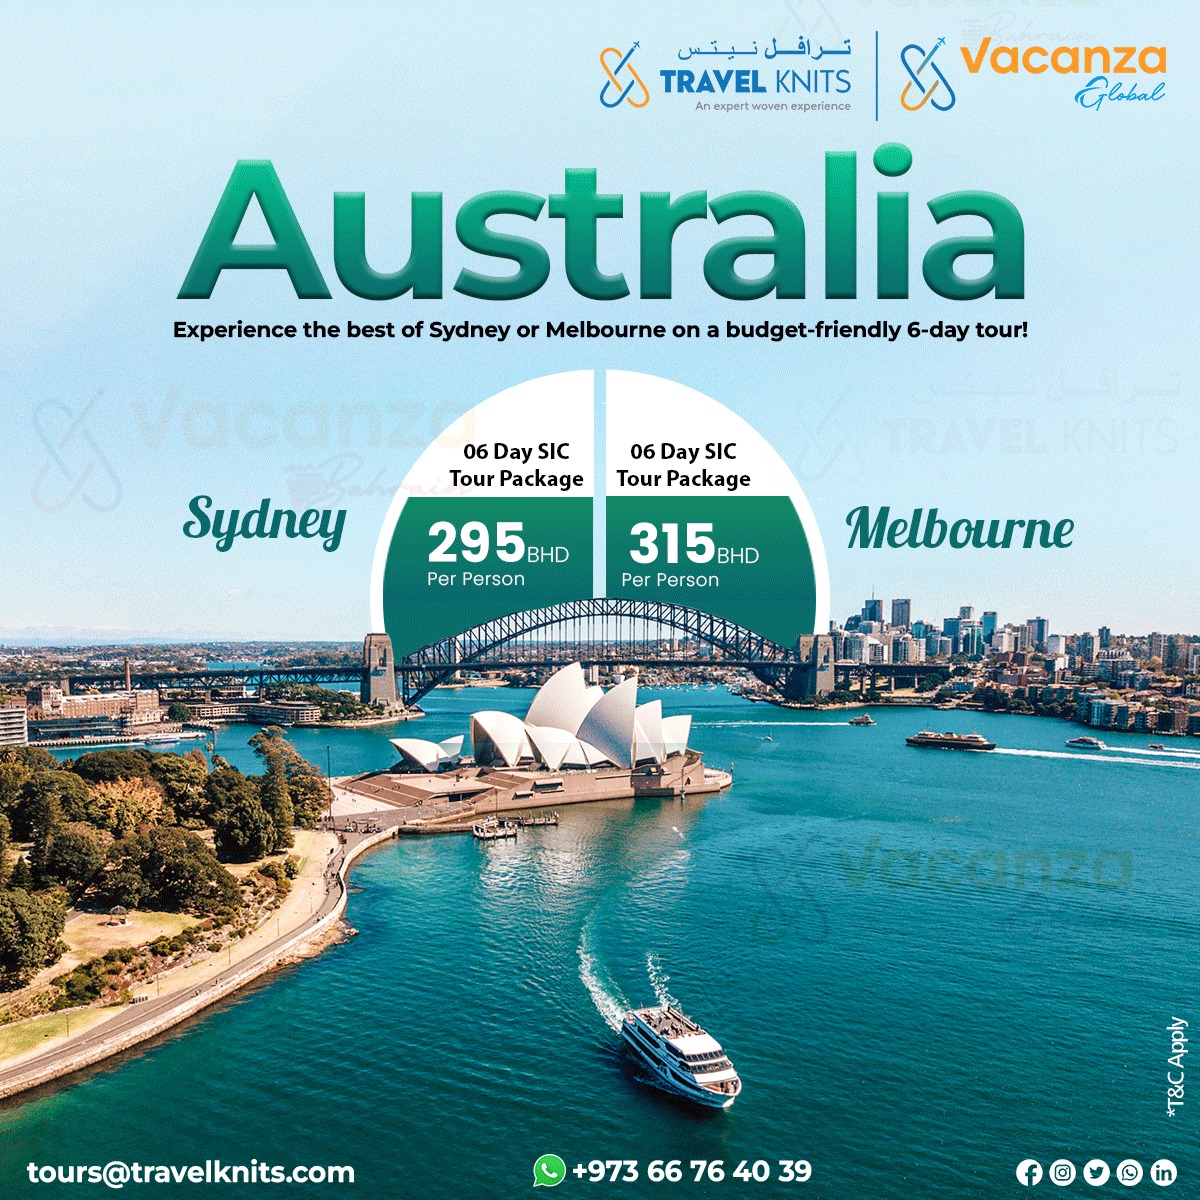 Melbourne Package |AustraliaTour Packages - Book honeymoon ,family,adventure tour packages to Australia|Travel Knits												